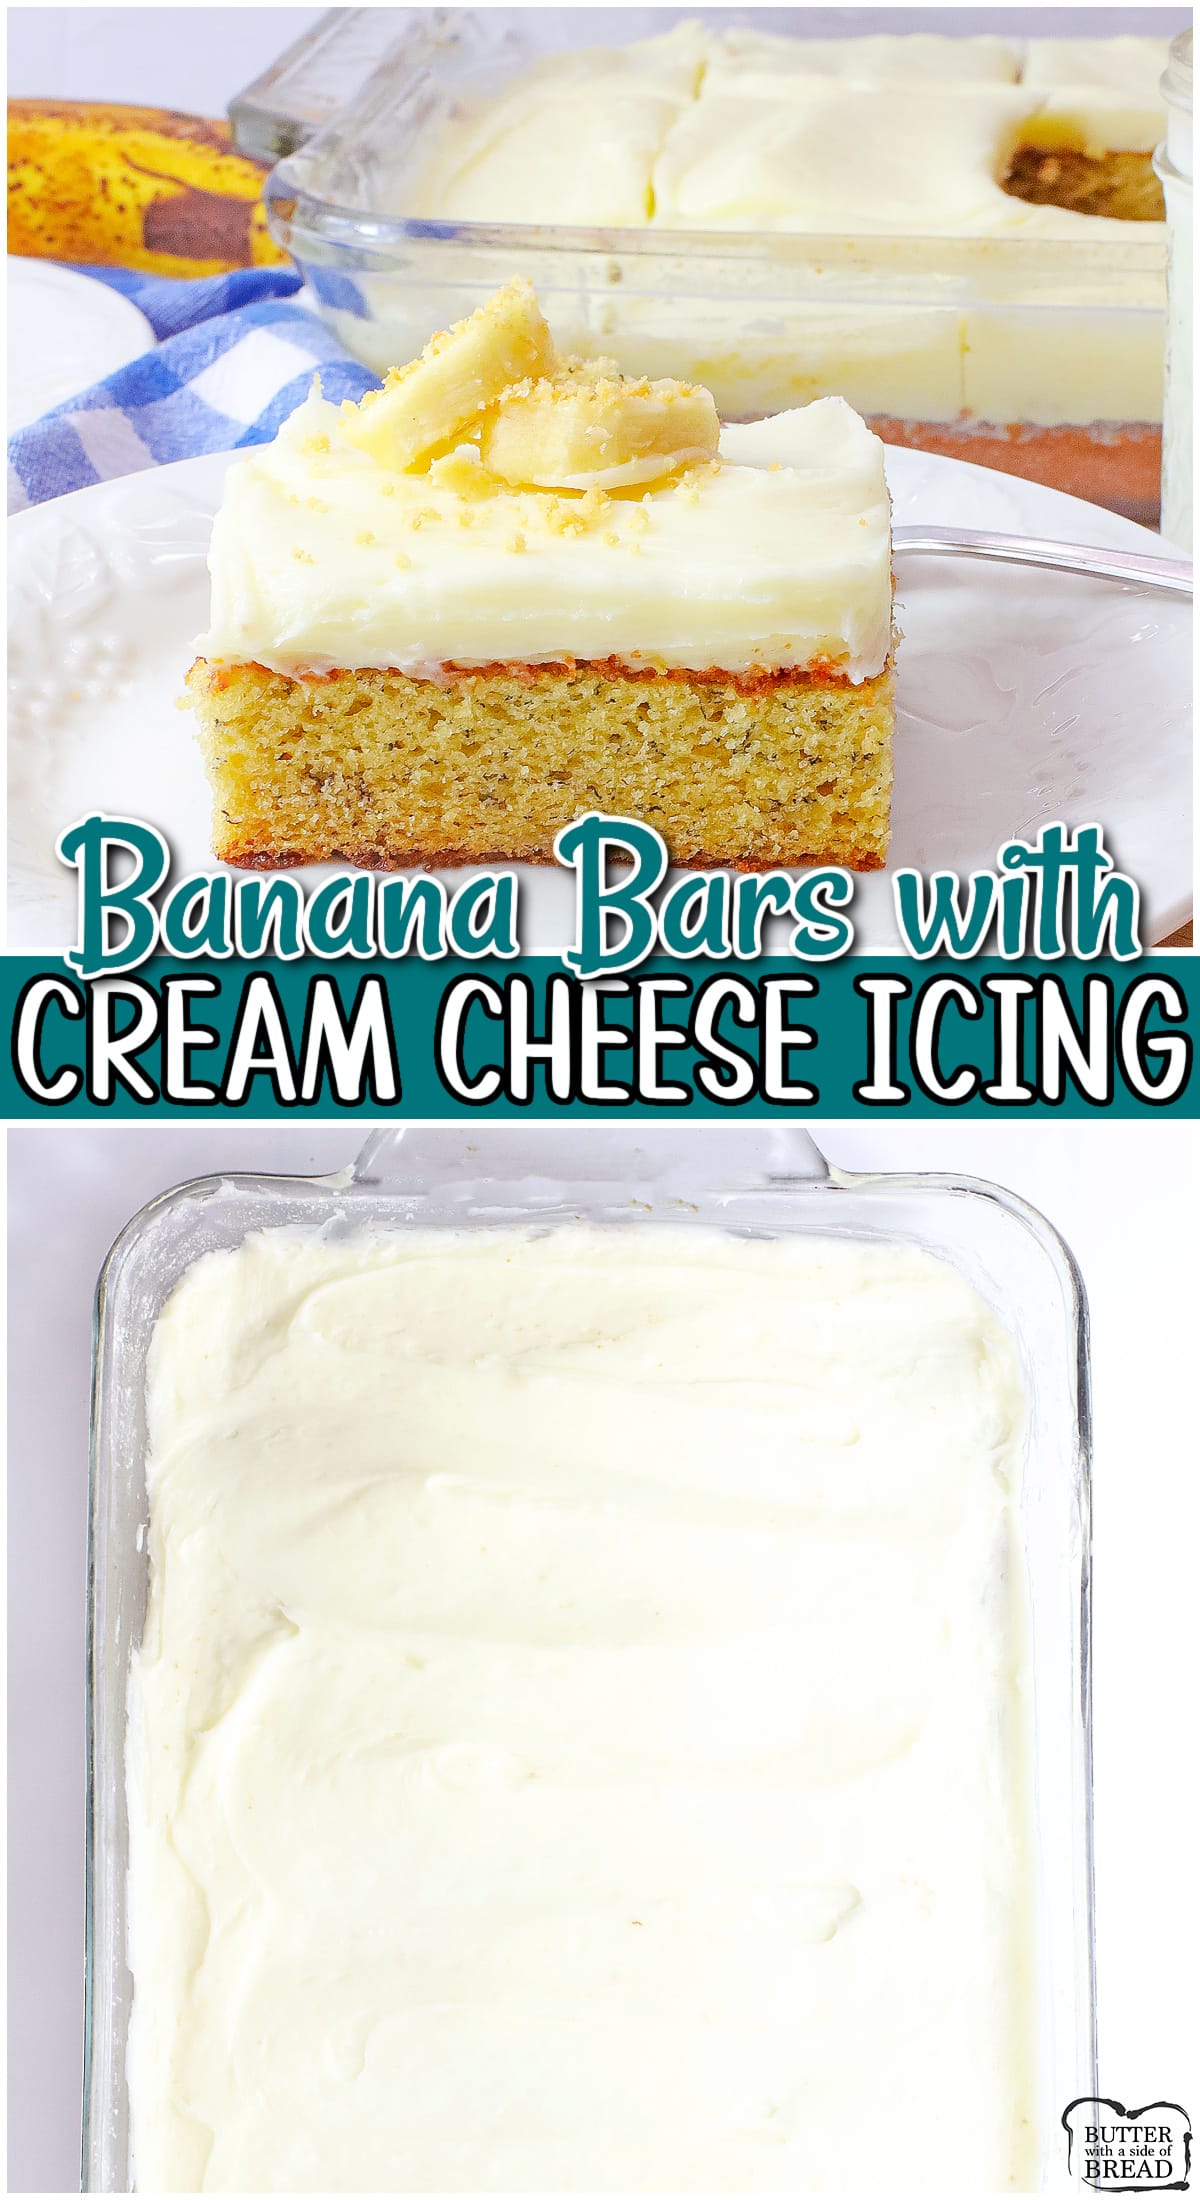 Old fashioned Banana Bars with Cream Cheese Frosting made with classic ingredients including ripe bananas, cinnamon, butter & sugar. Sweet, cake-like dessert bars loaded with delicious banana flavor! 